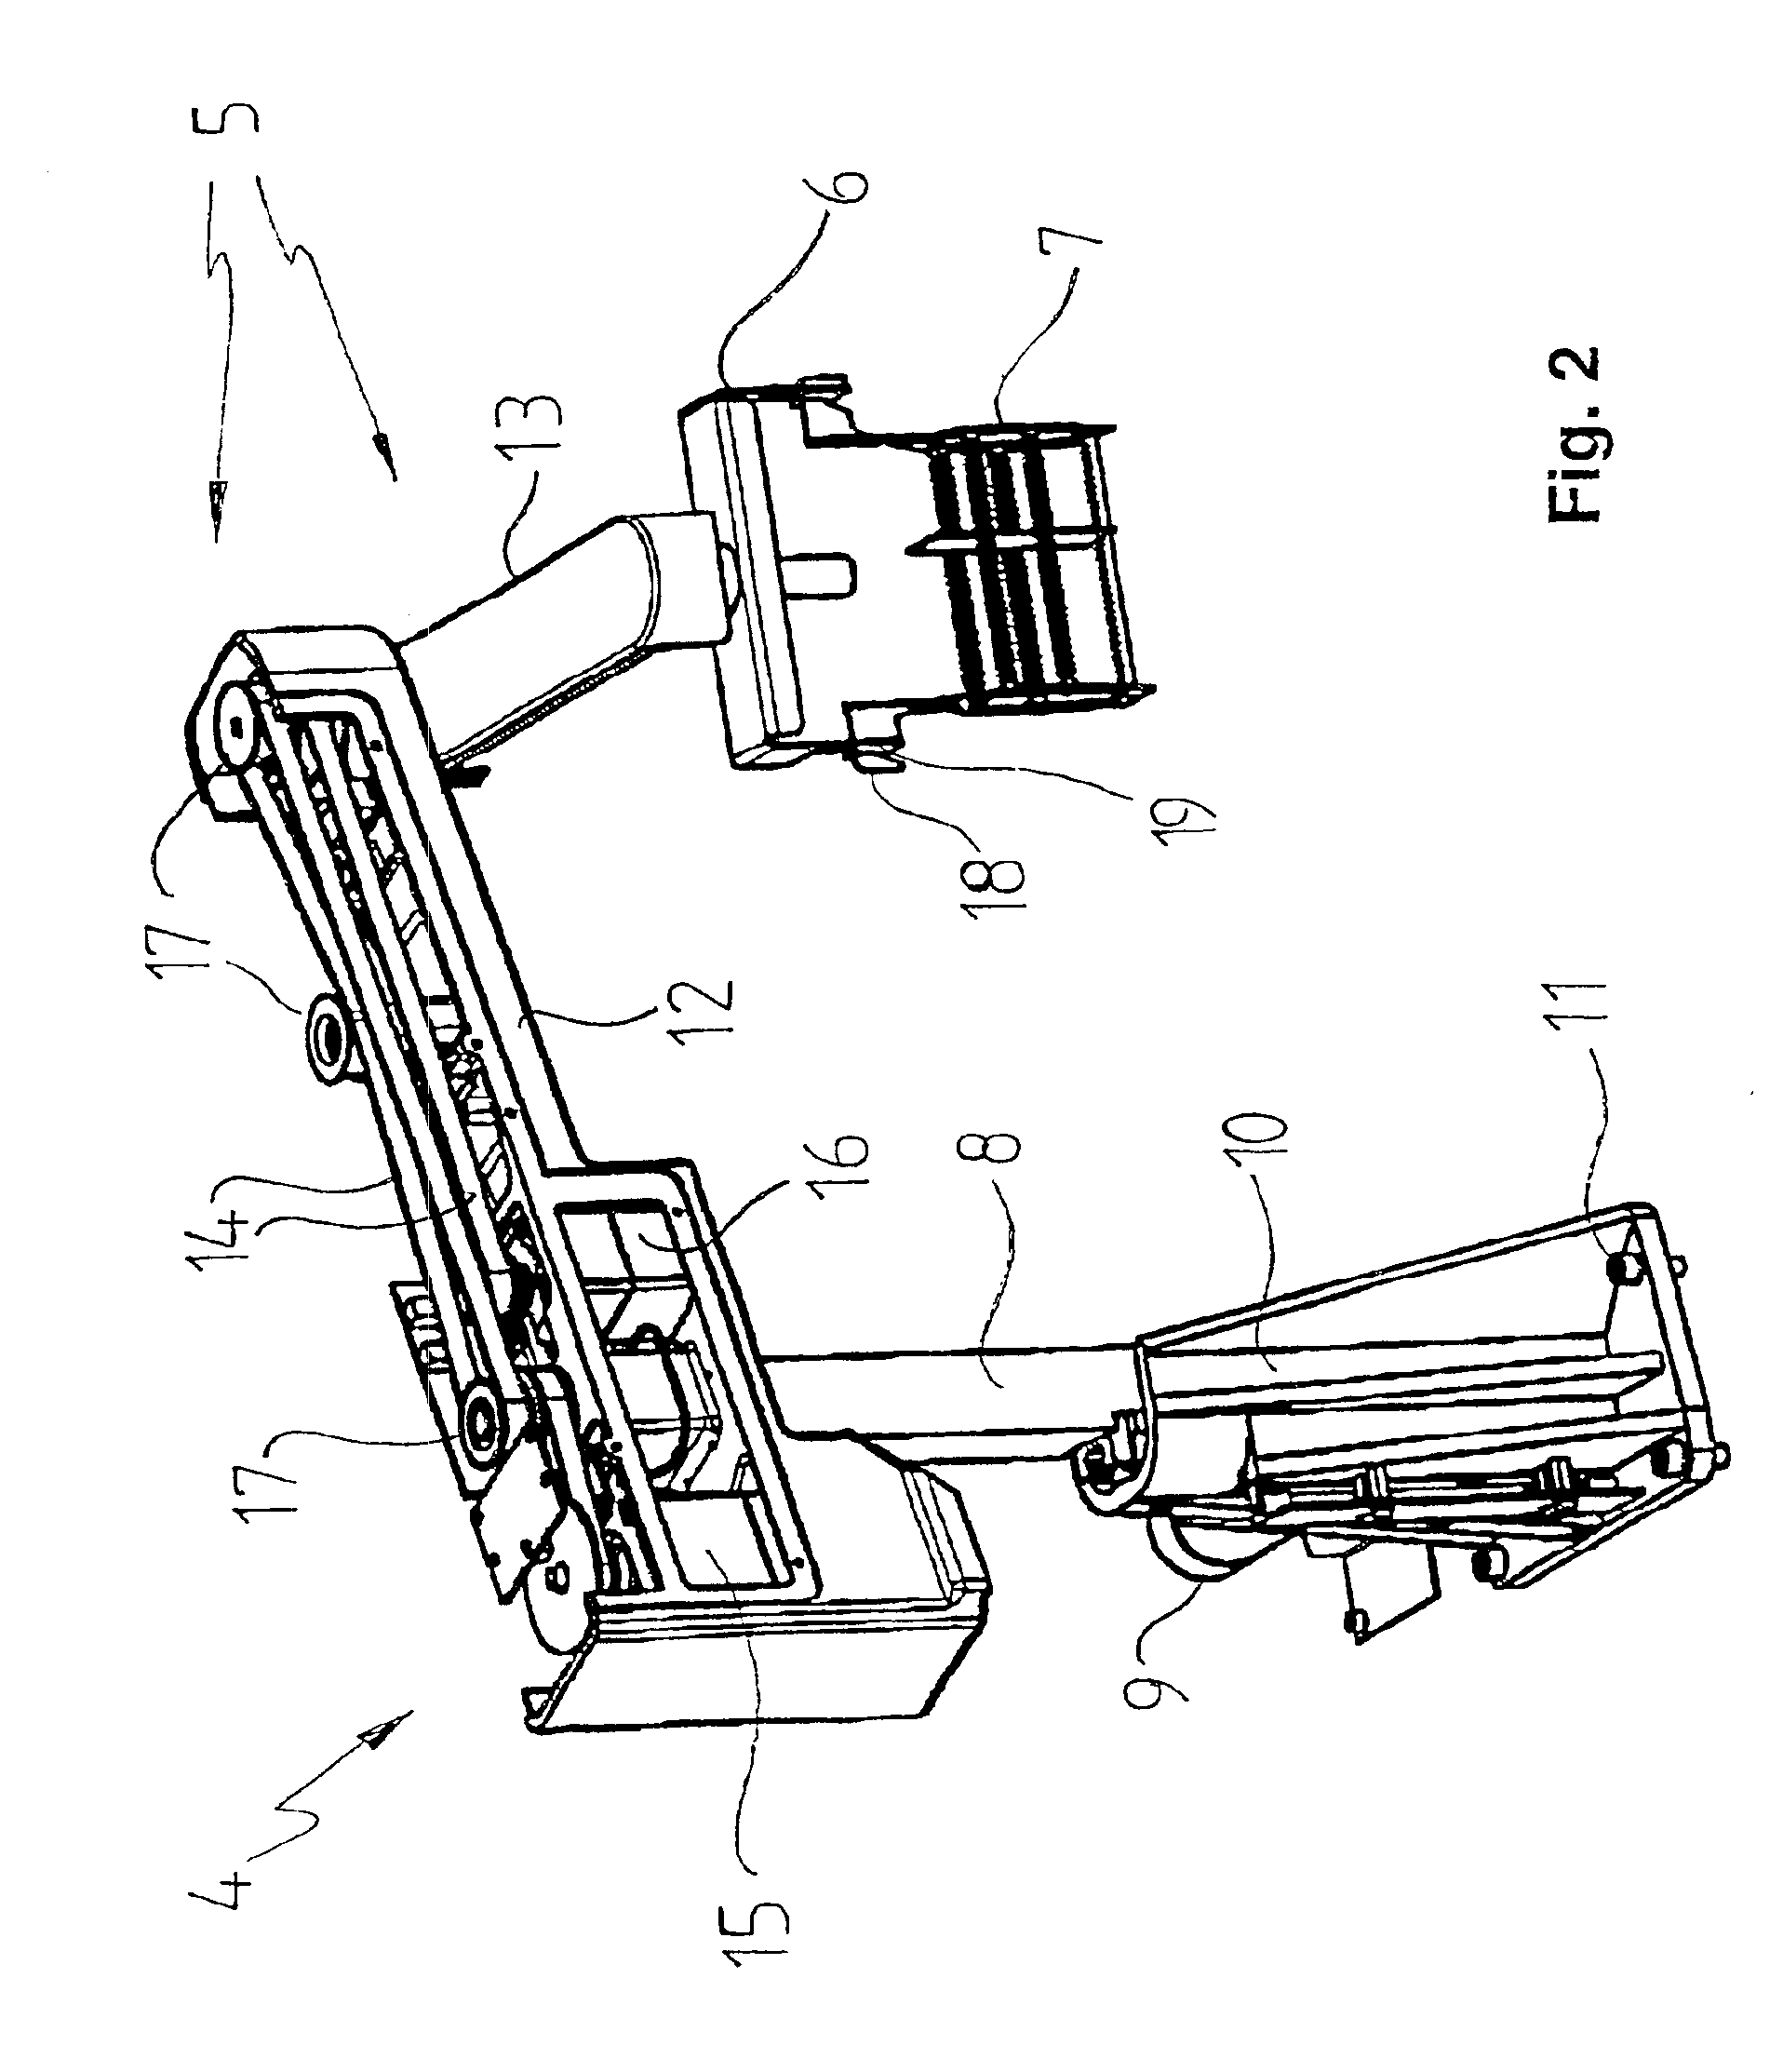 Apparatus for treating cytological or histological specimens